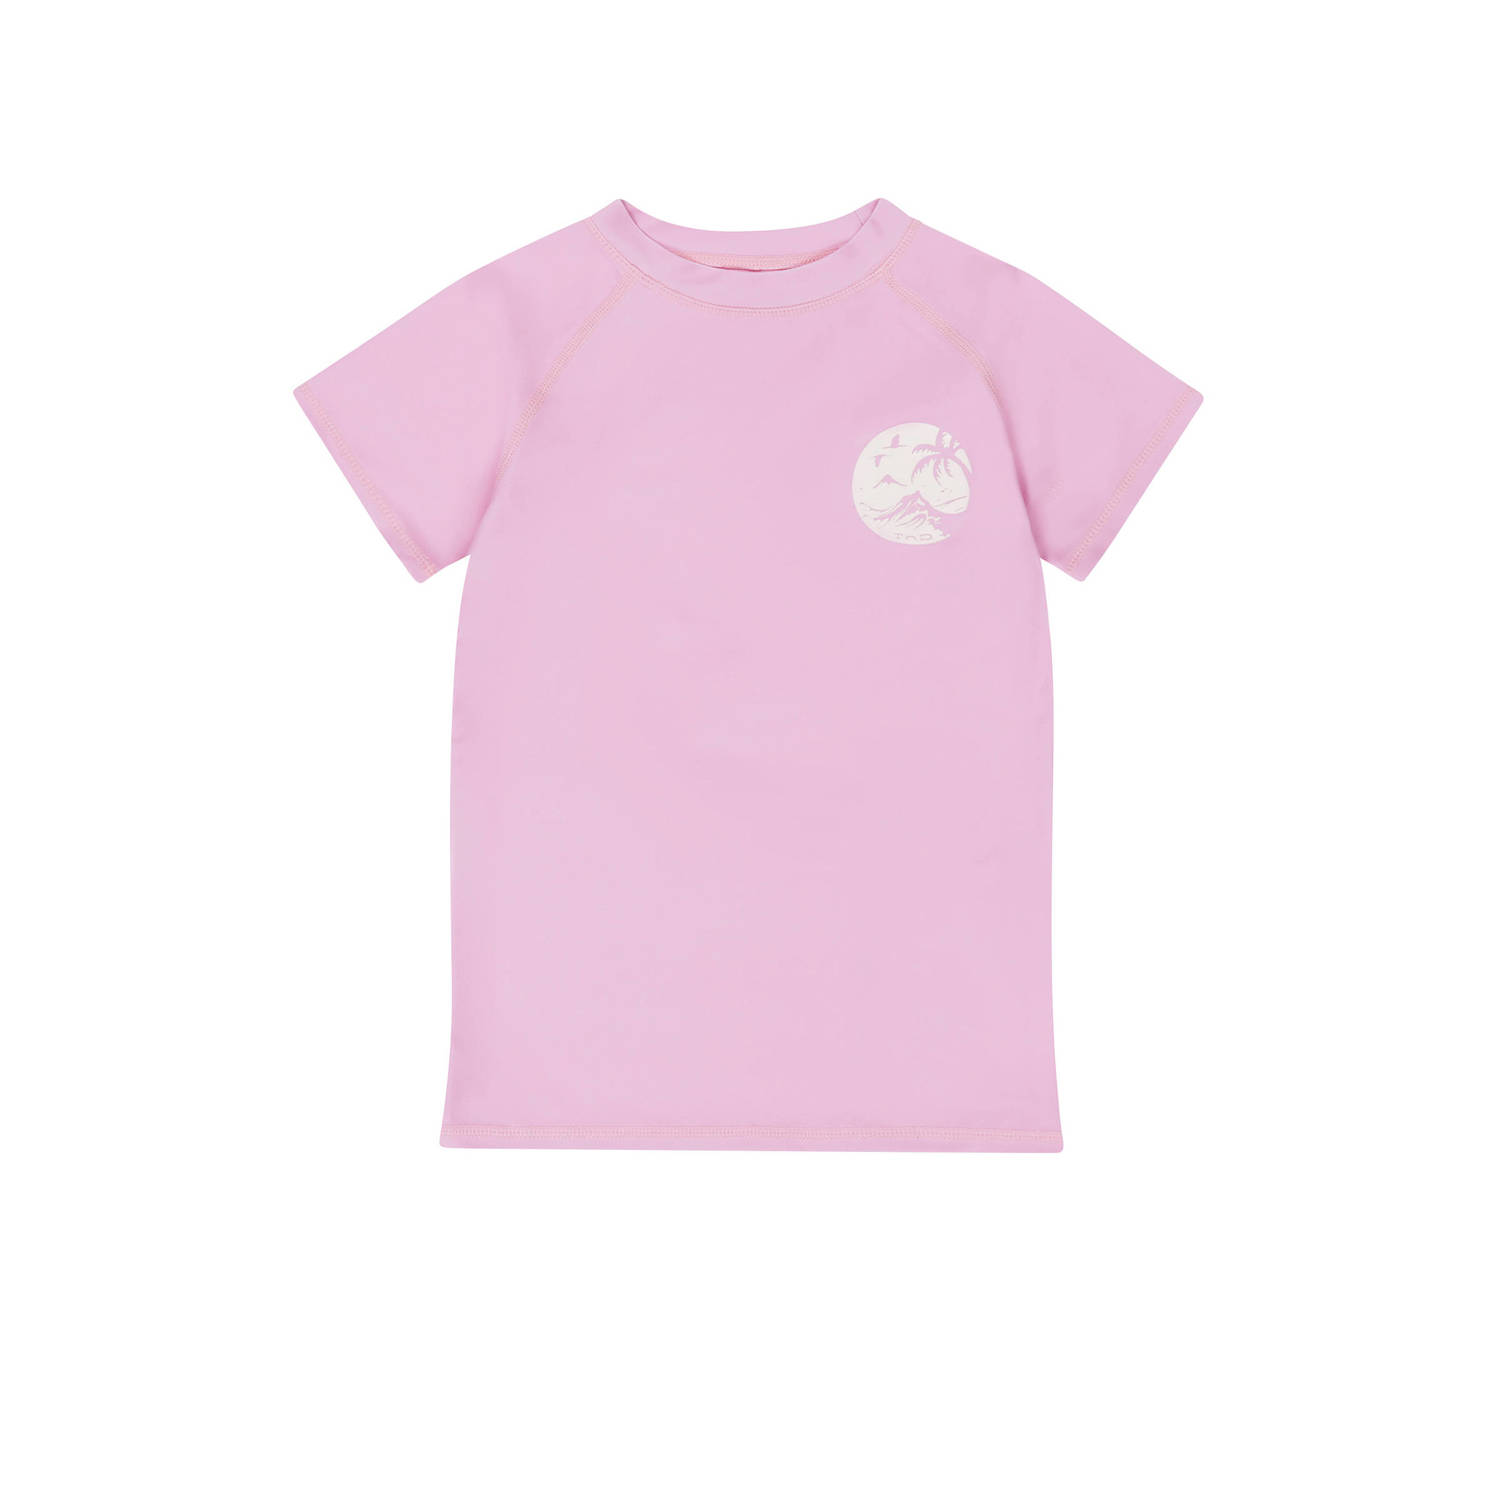 Tumble 'n Dry UV T-shirt Soleil roze UV shirt Meisjes Gerecycled polyester Ronde hals 110 116